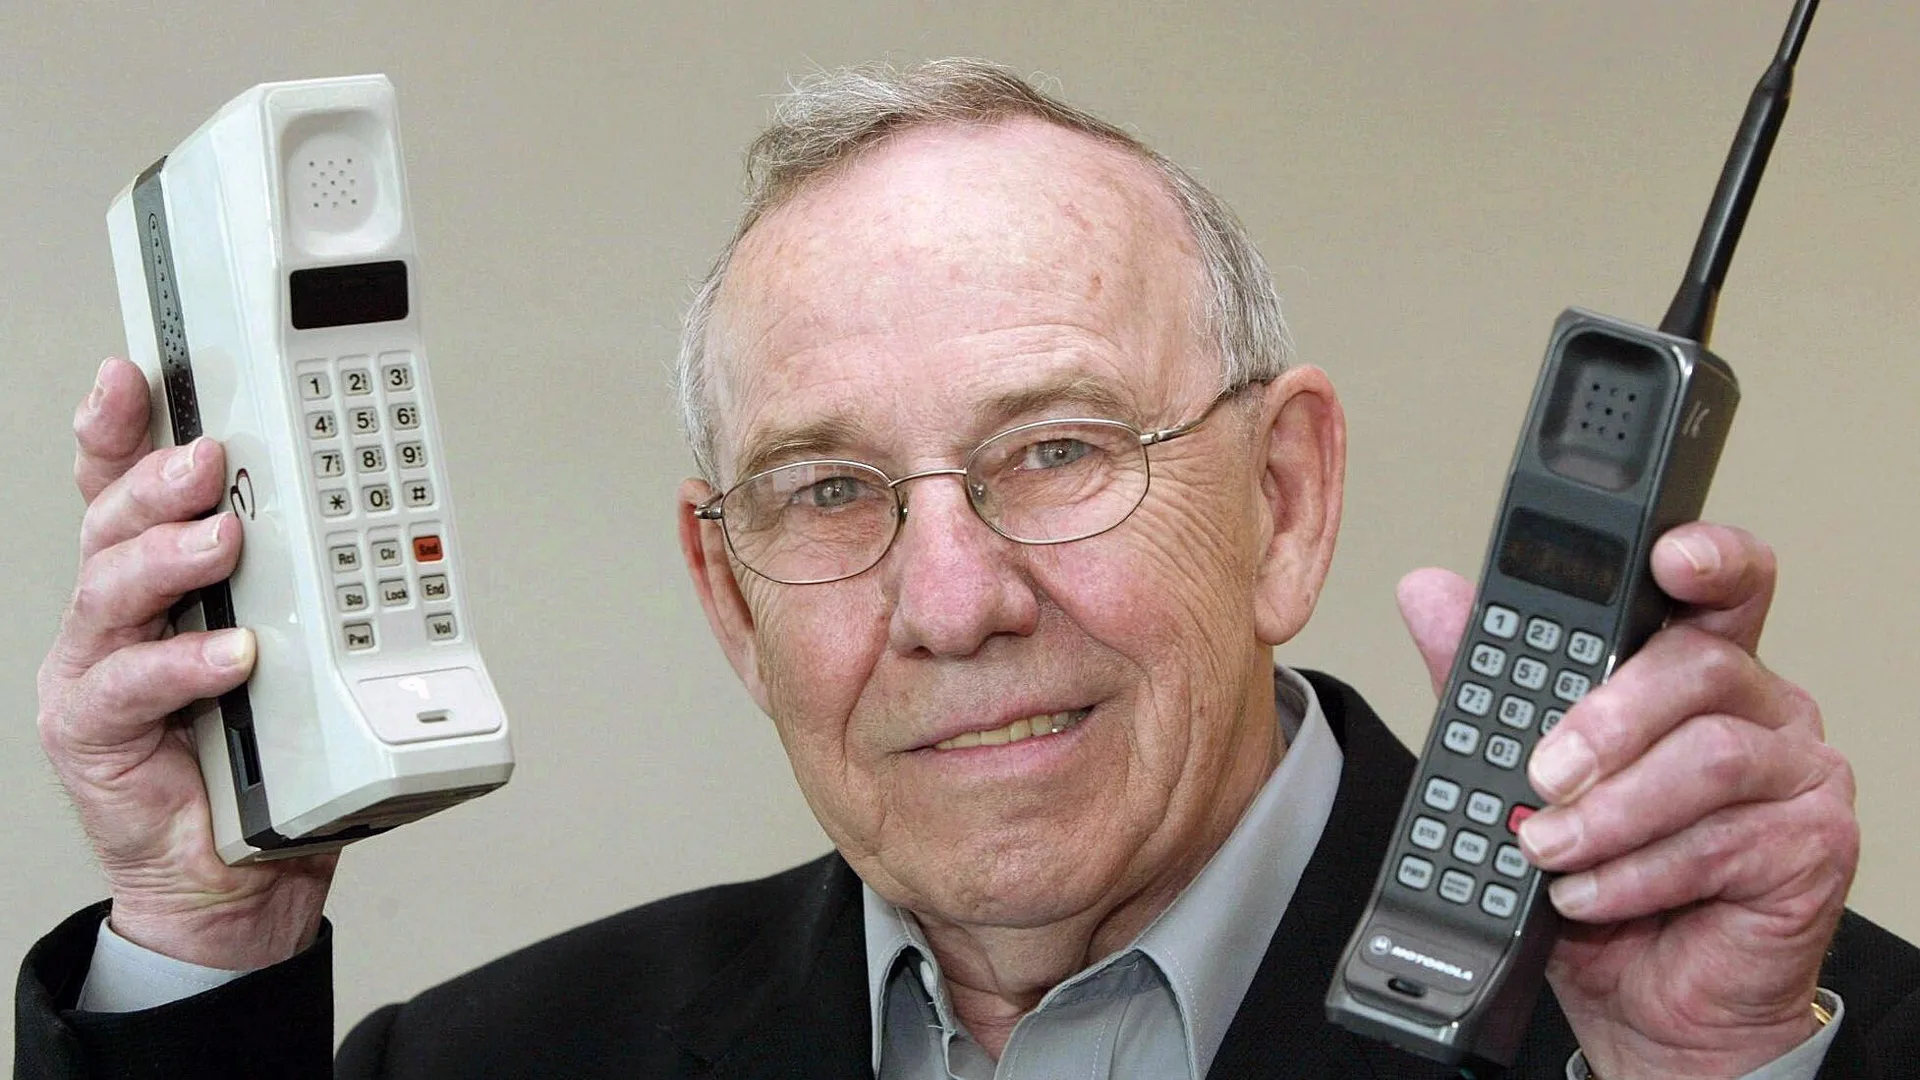 A photograph of Rudy Krolopp the Motorola design chief who made the first mobile phone - he is holding both original models up with a smile on his face against a beige background